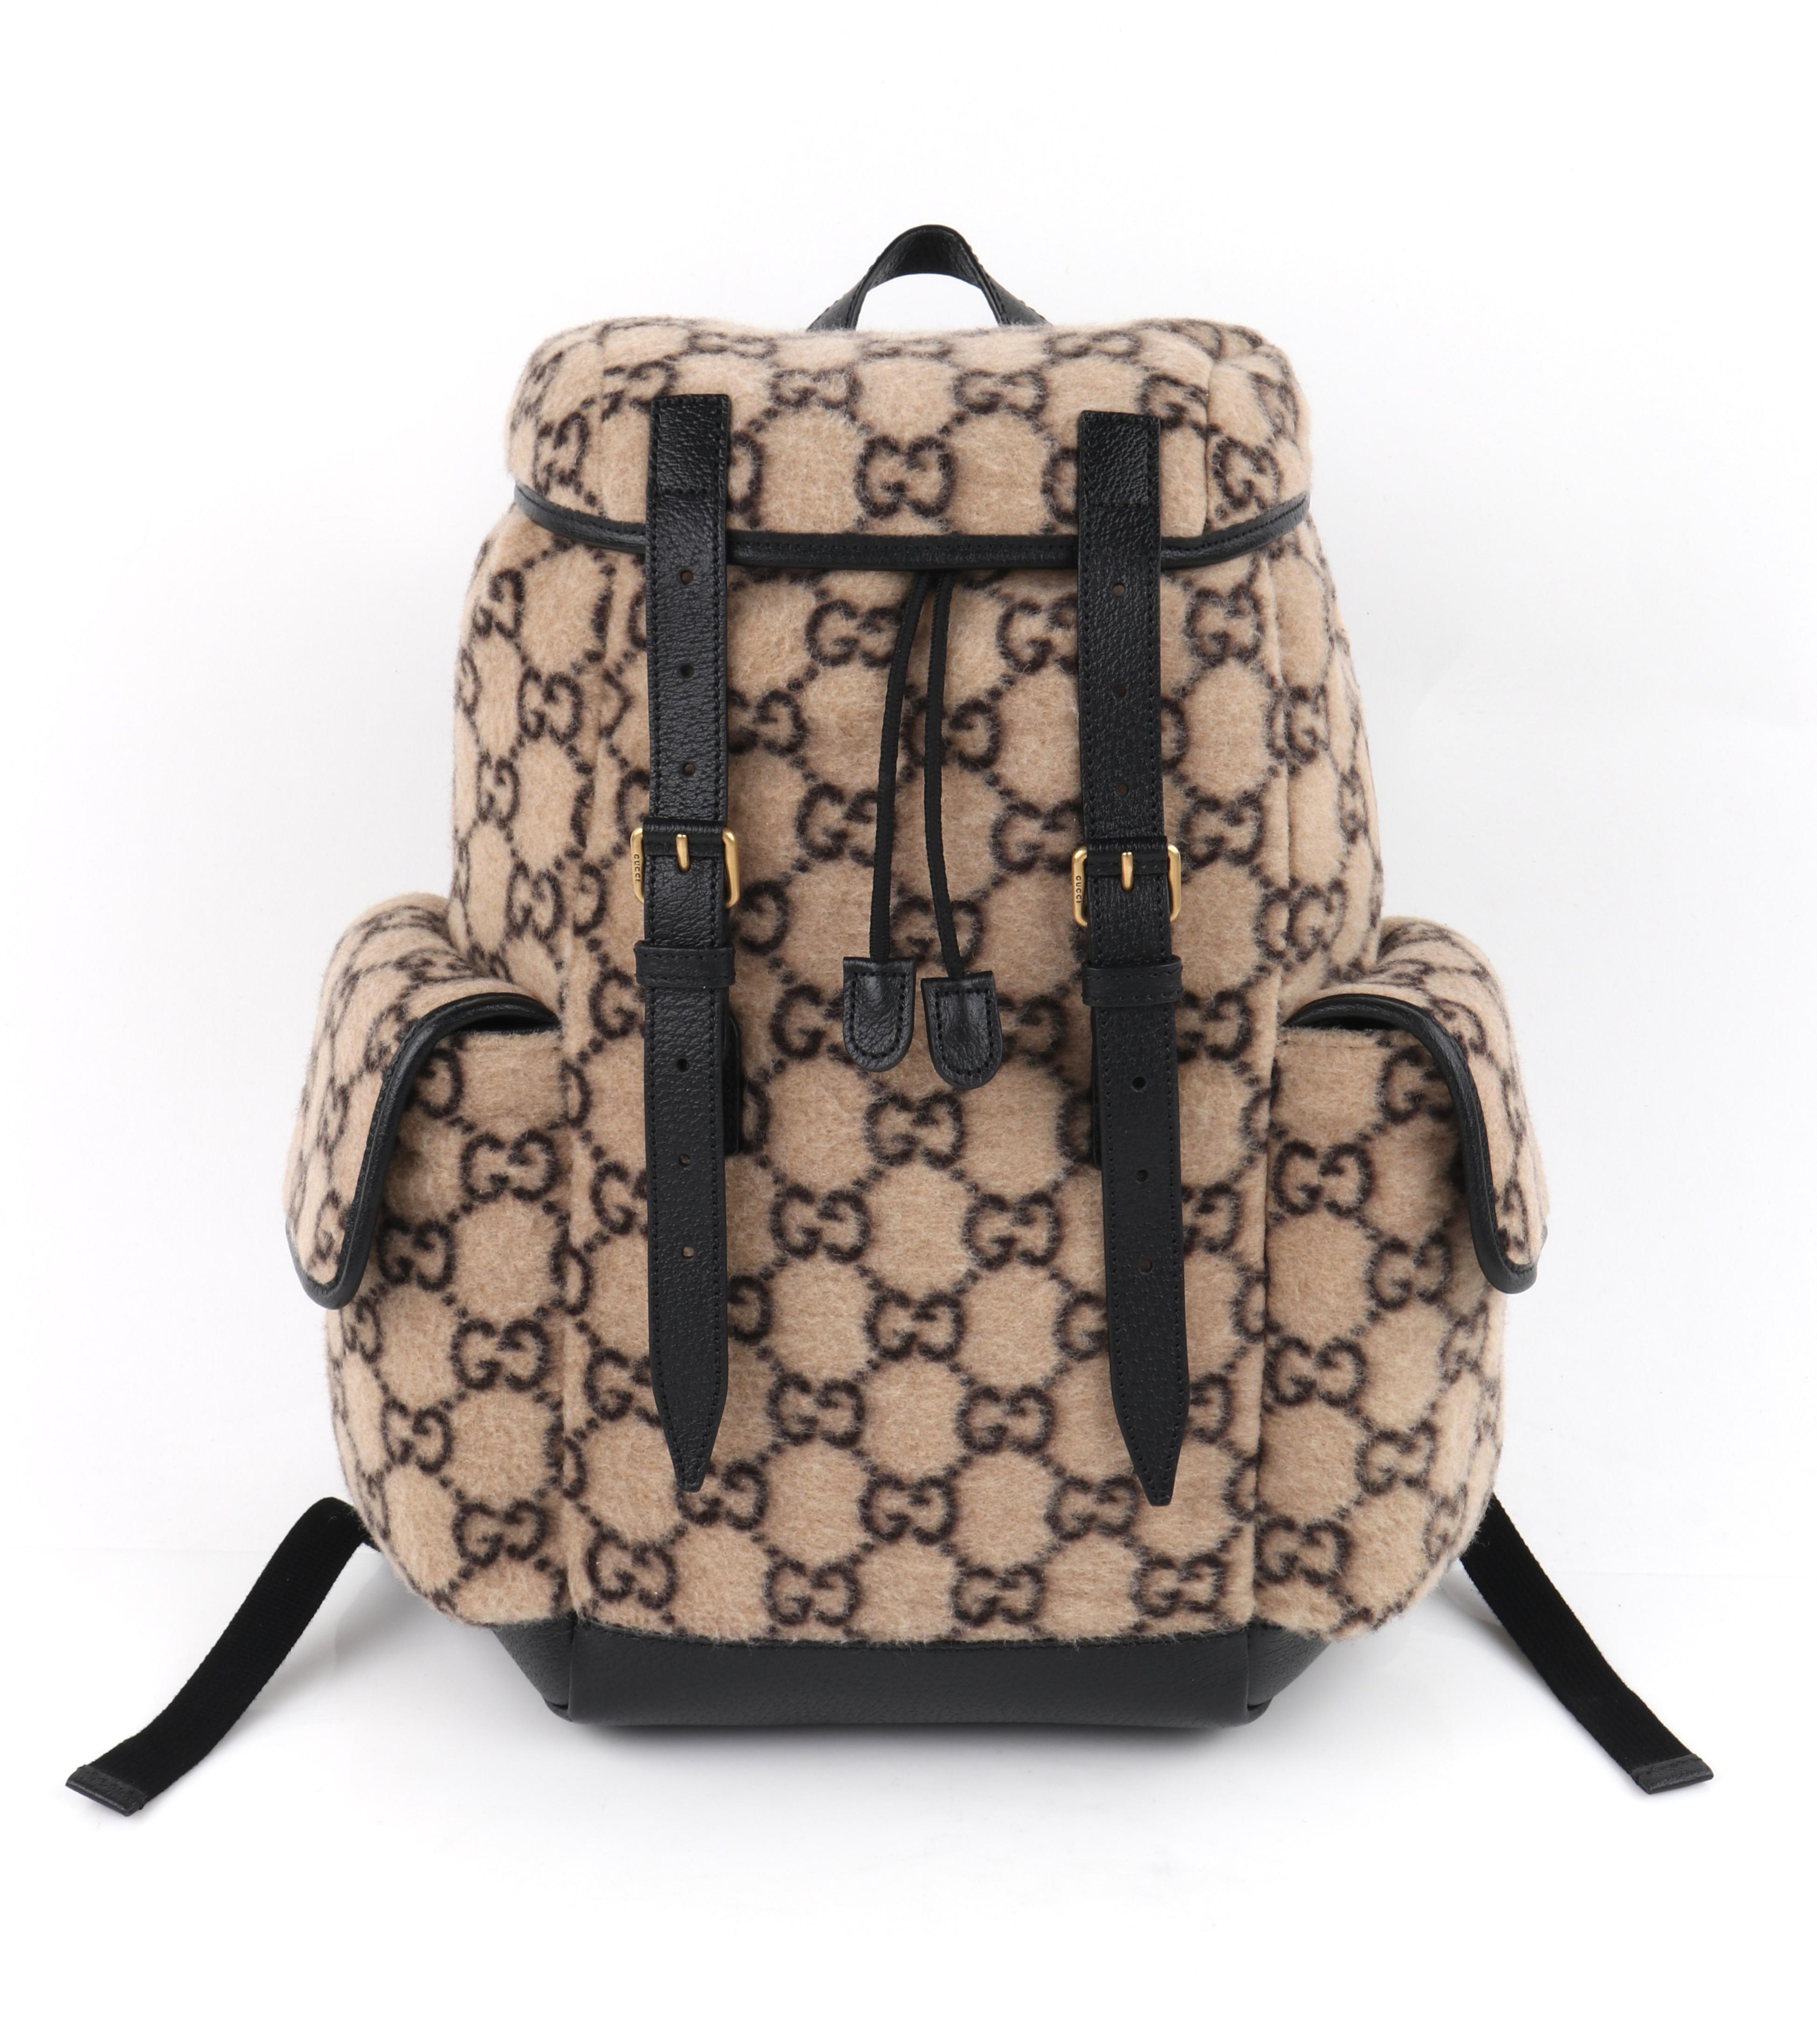 Brand / Manufacturer: Gucci
Collection: 2019
Designer: Alessandro Michele
Style: Backpack
Color(s): Shades of brown, beige, black, gold
Lined: Yes 
Unmarked Fabric Content (feel of): Wool (primary material), leather (trim, bottom, straps), metal